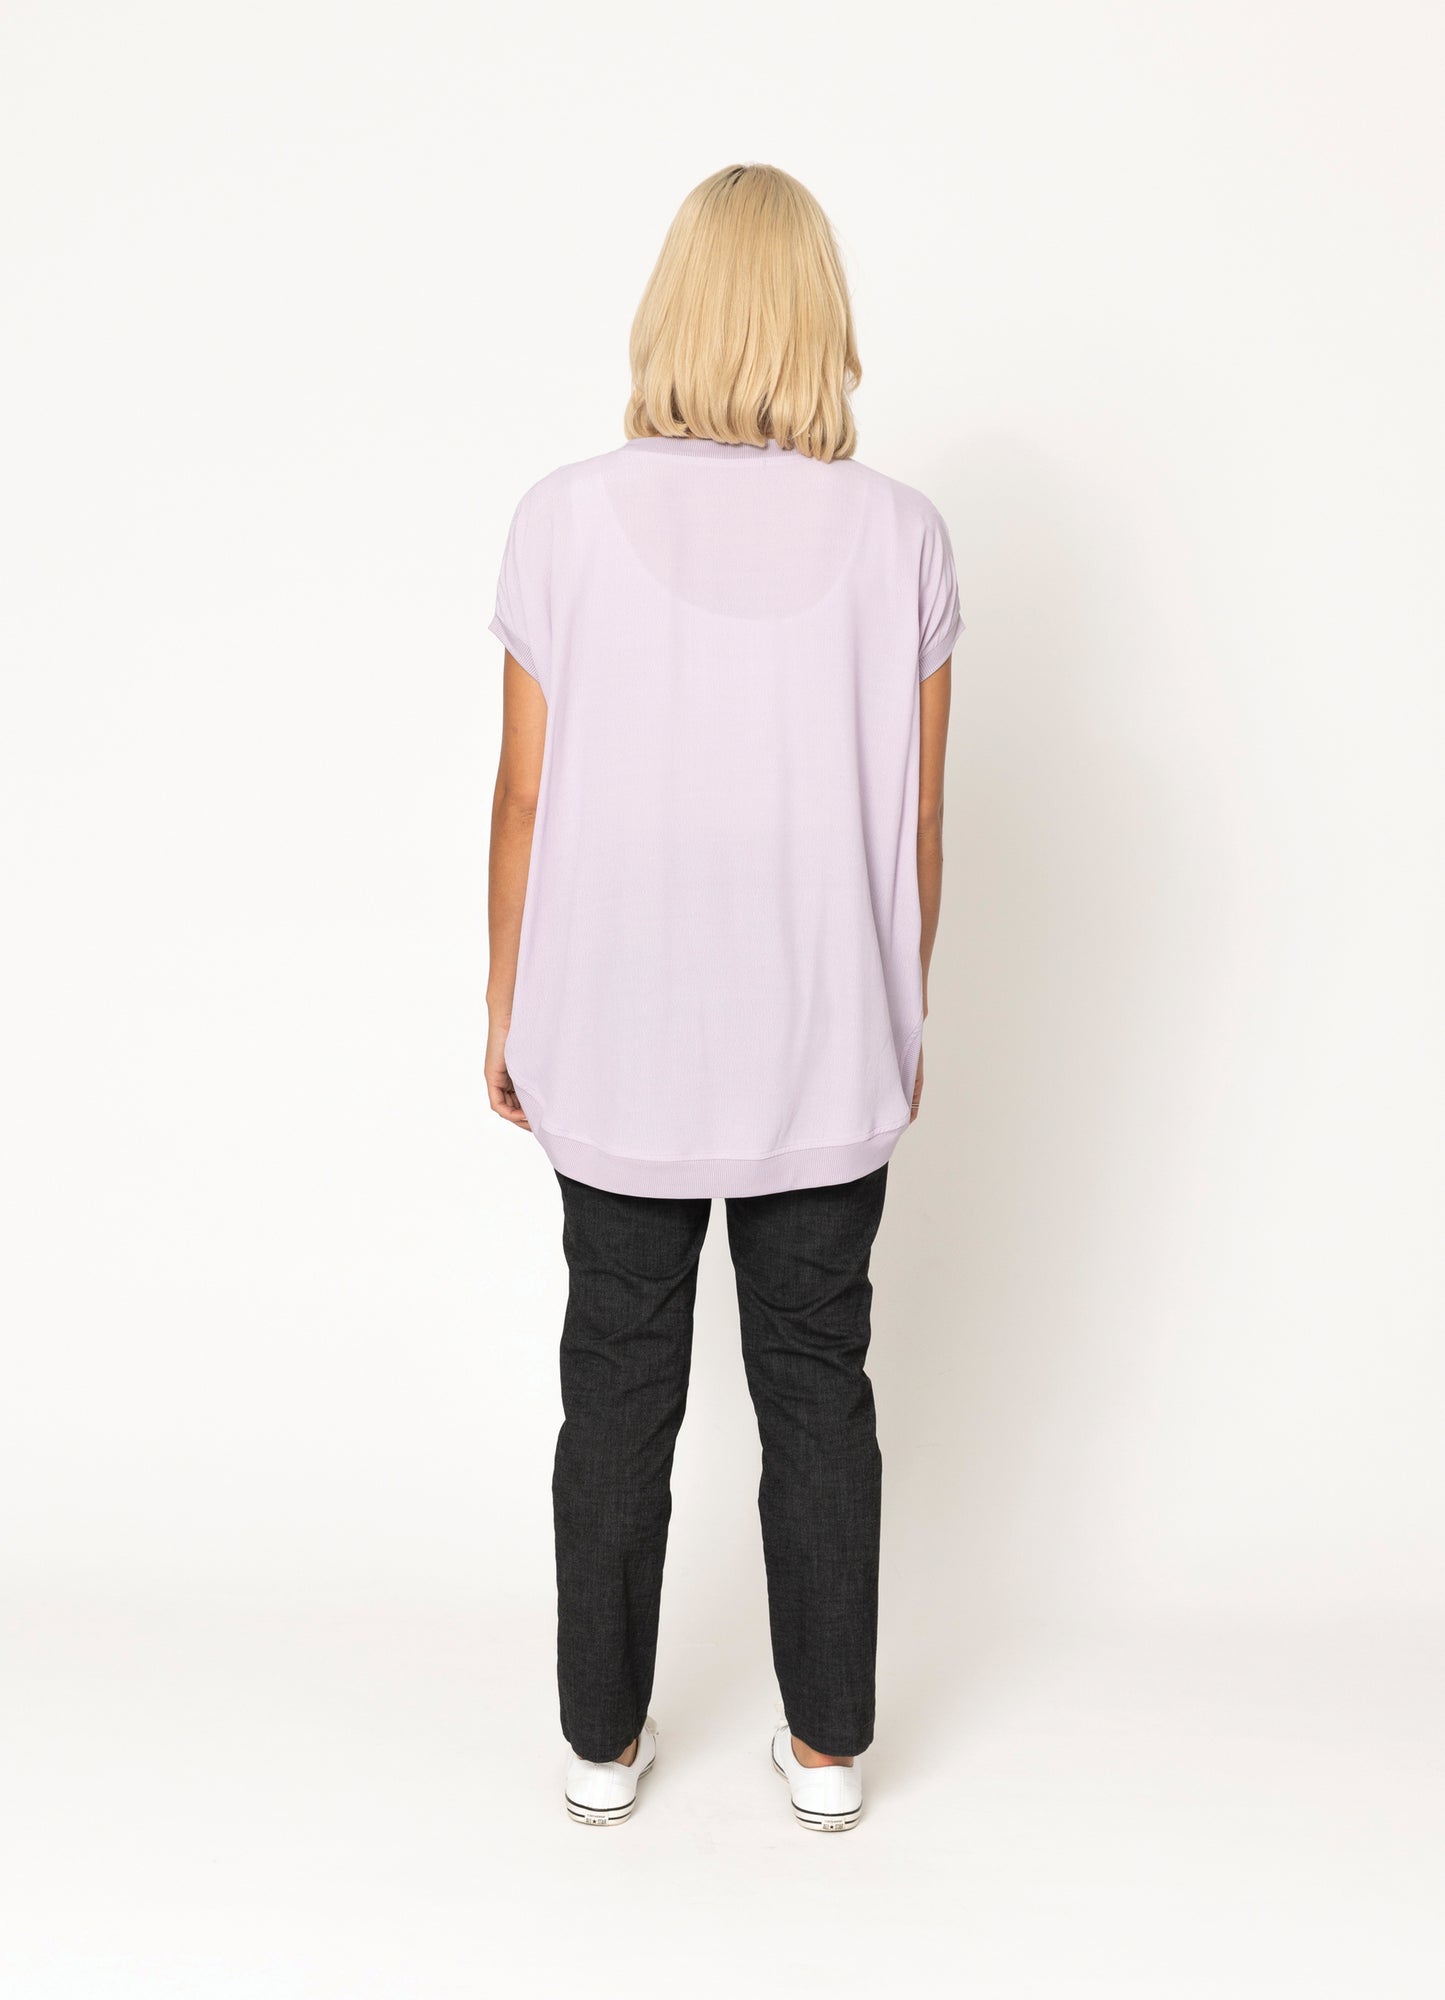 Violet Top With Print